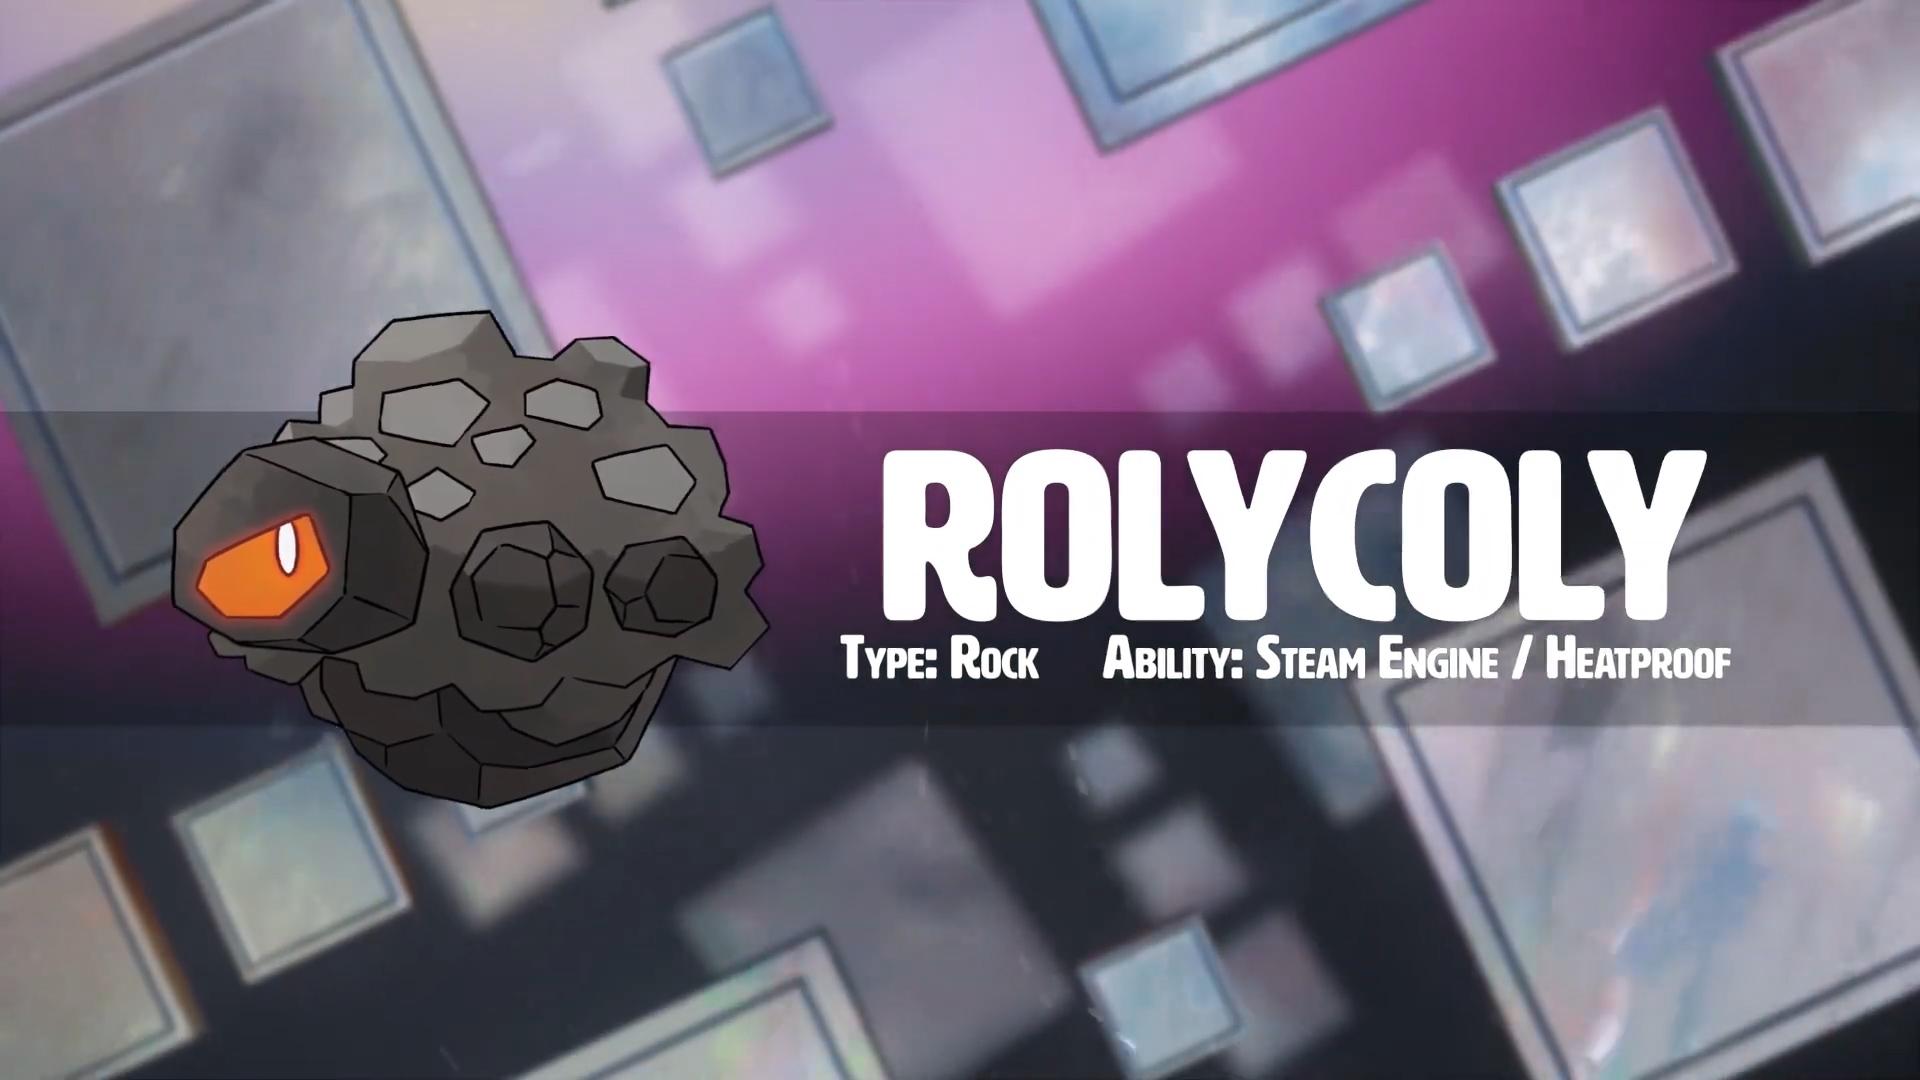 Rolycoly evolutions were shown in new Pokémon Sword